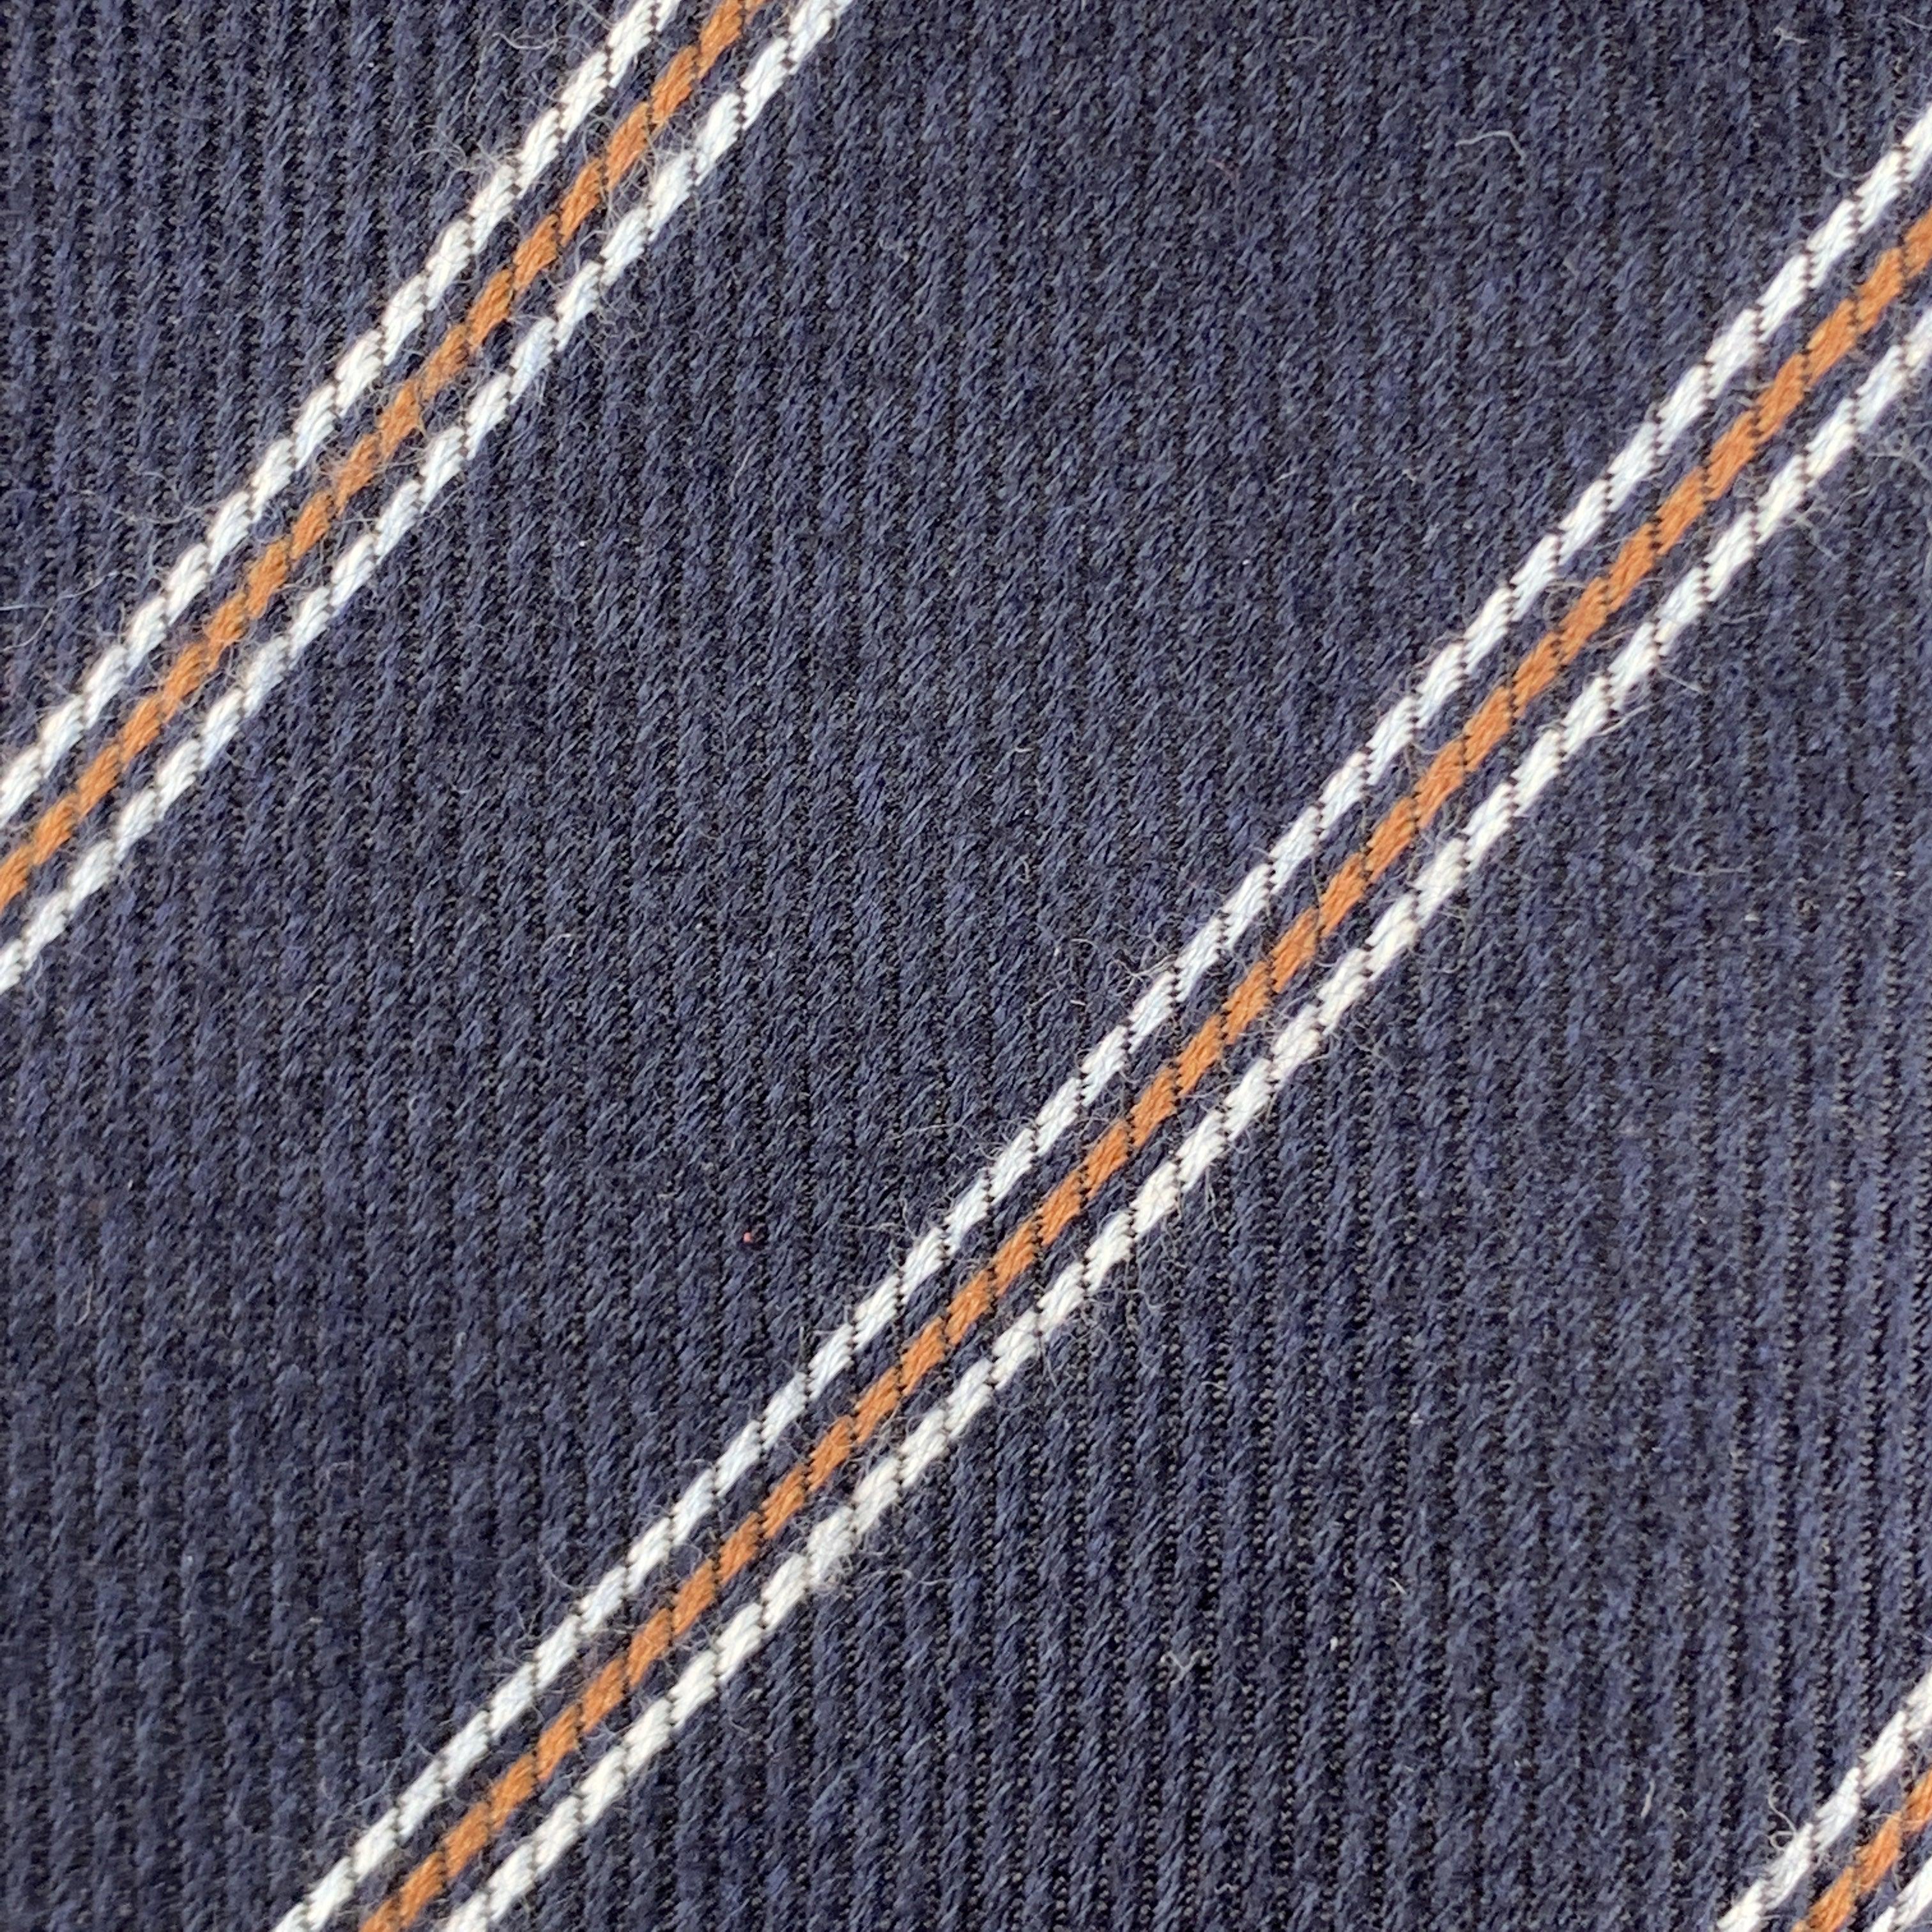 LUIGI BORELLI
necktie comes in navy silk cashmere blend with all over diagonal striped print. Made in Italy. Very Good Pre-Owned Condition.Width: 3.5 inches 
  
  
 
Reference: 63192
Category: Tie
More Details
    
Brand:  LUIGI BORRELLI
Gender: 